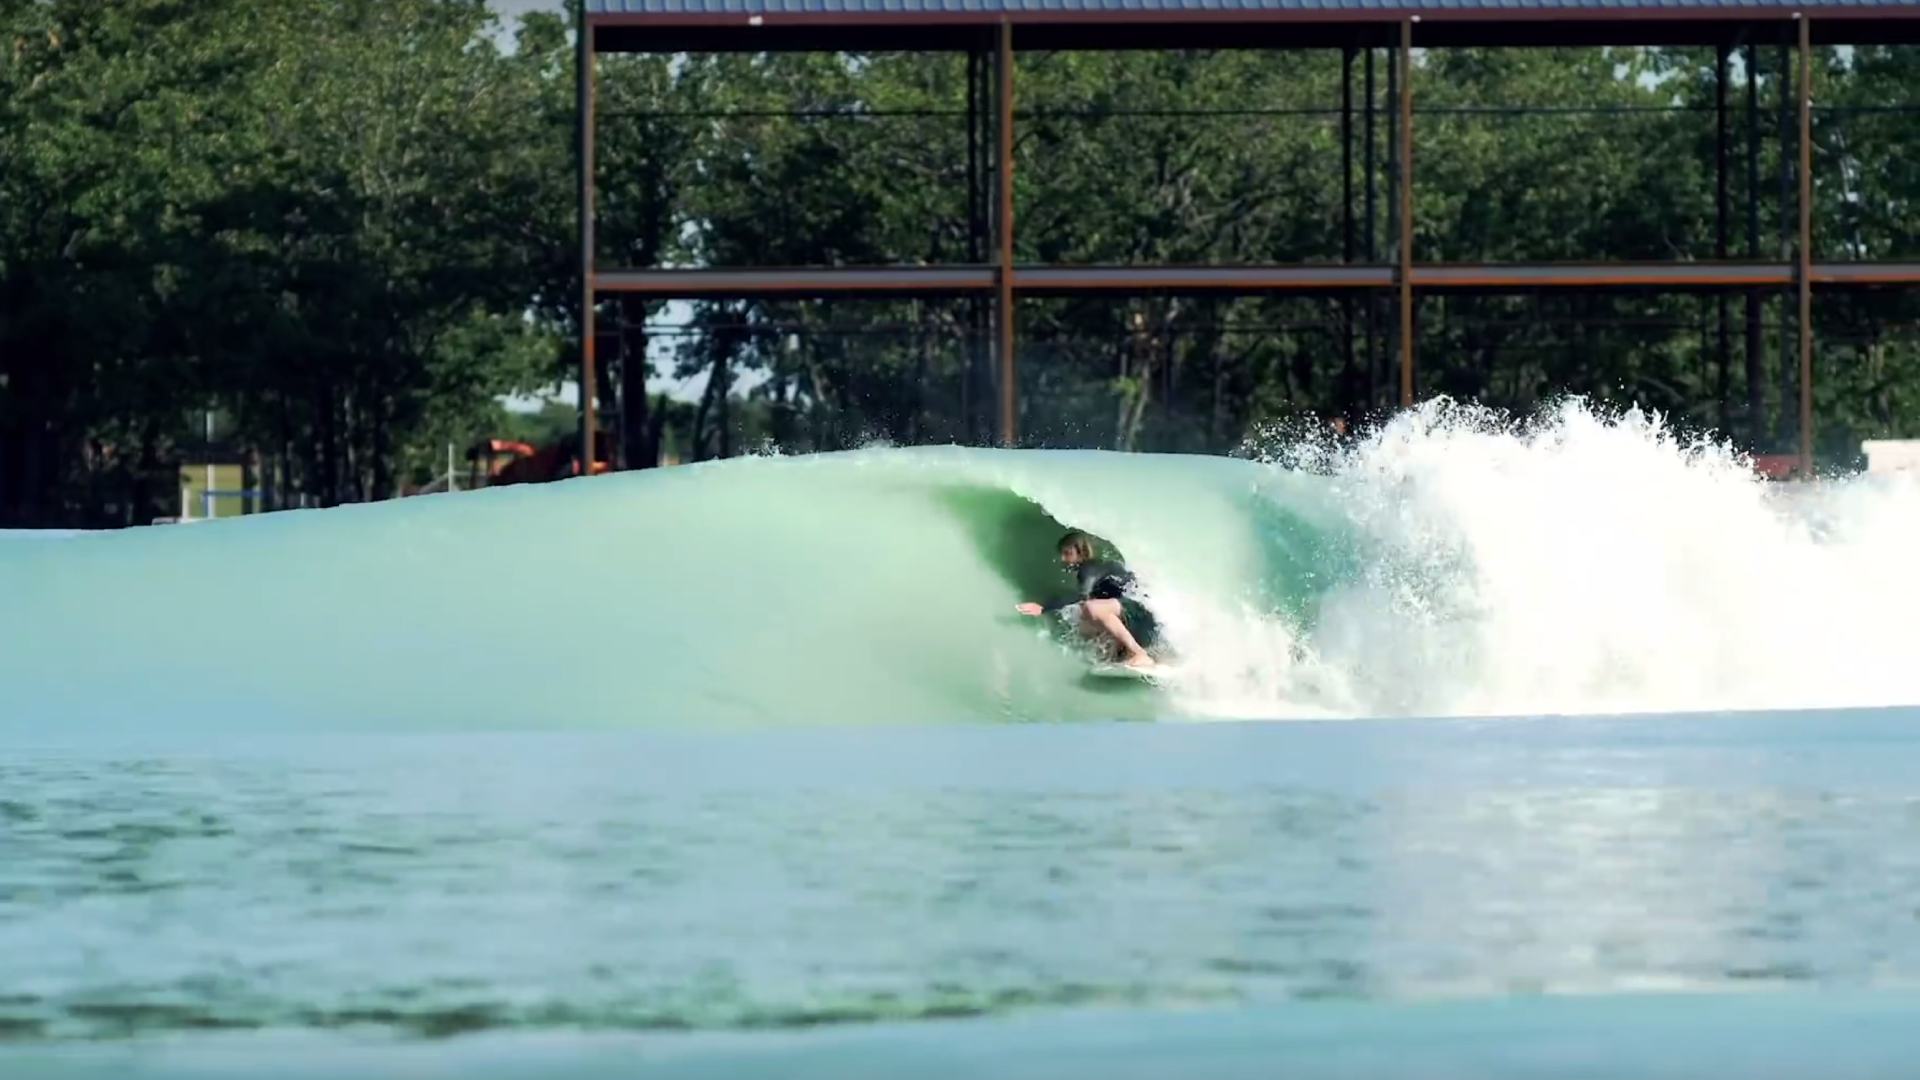 Tyler Warren tubed at the Waco wave pool